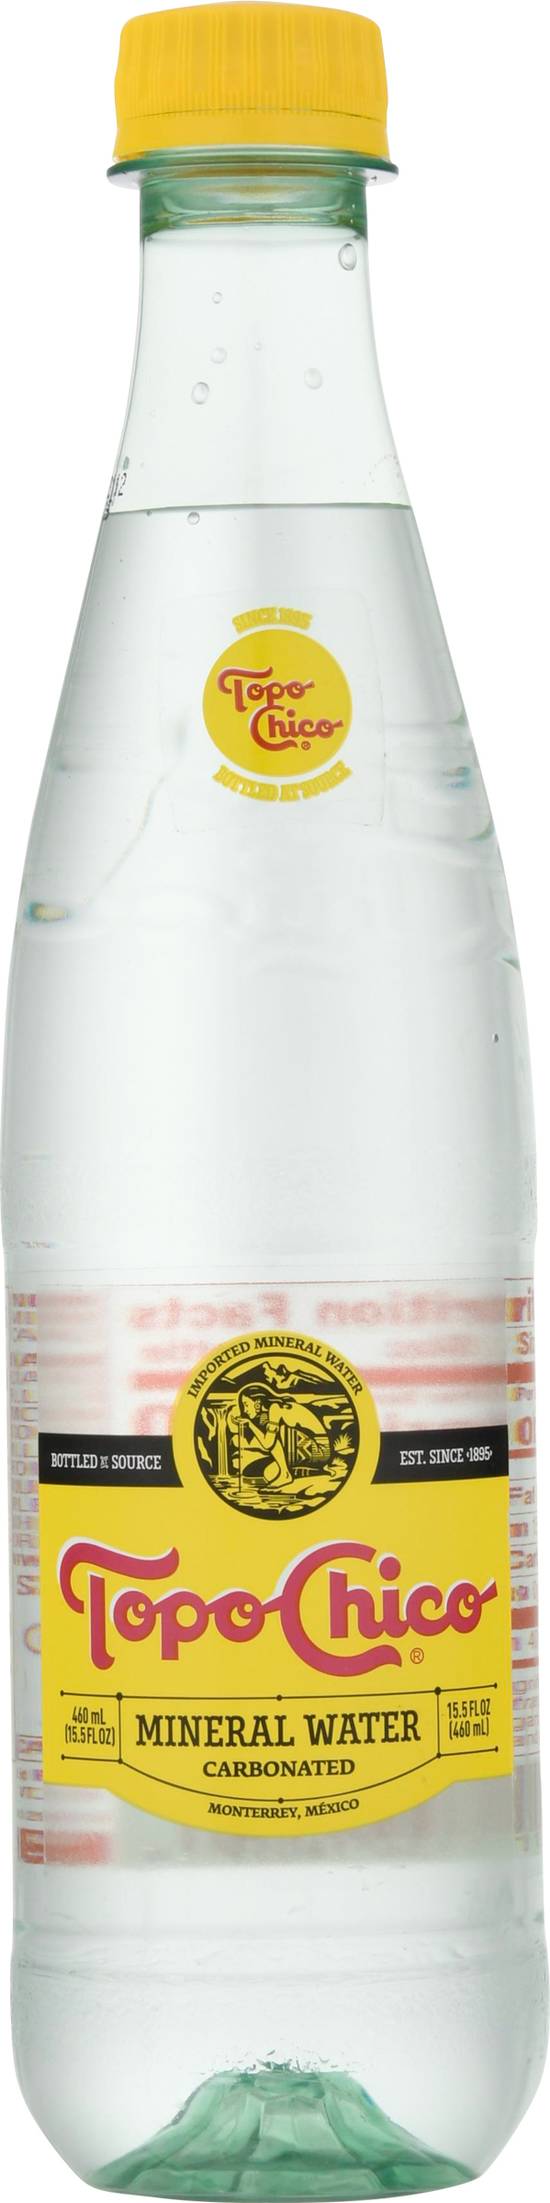 Topo Chico Carbonated Mineral Water (15.5 fl oz)